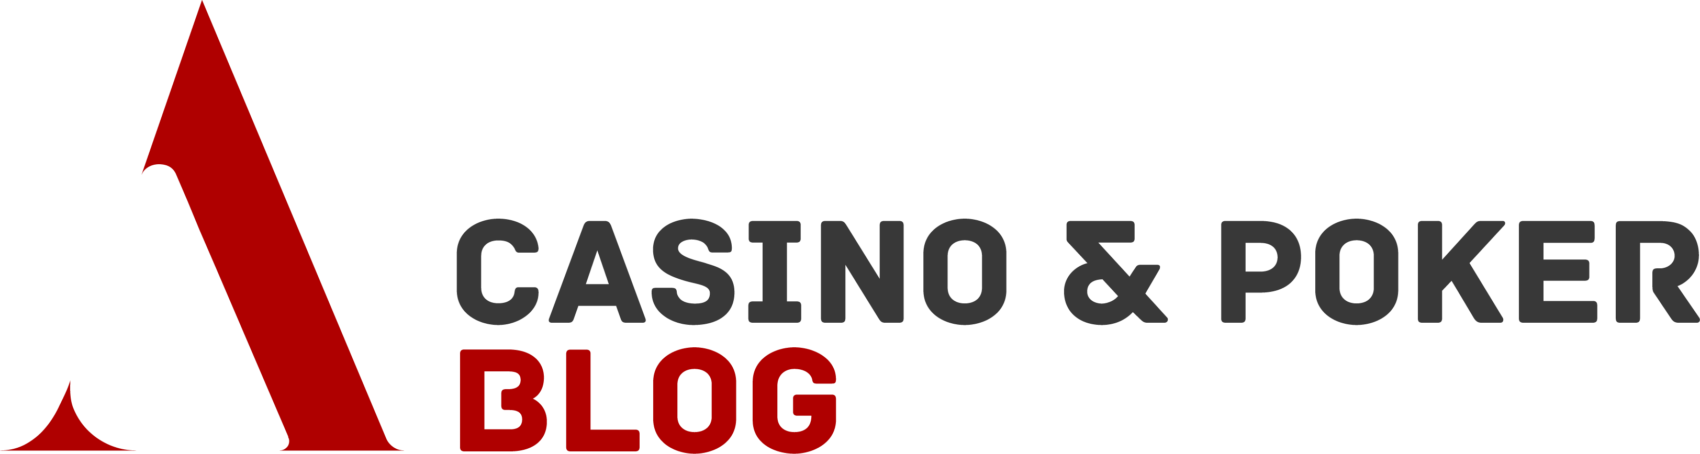 3+1 factors for wise online casino selection